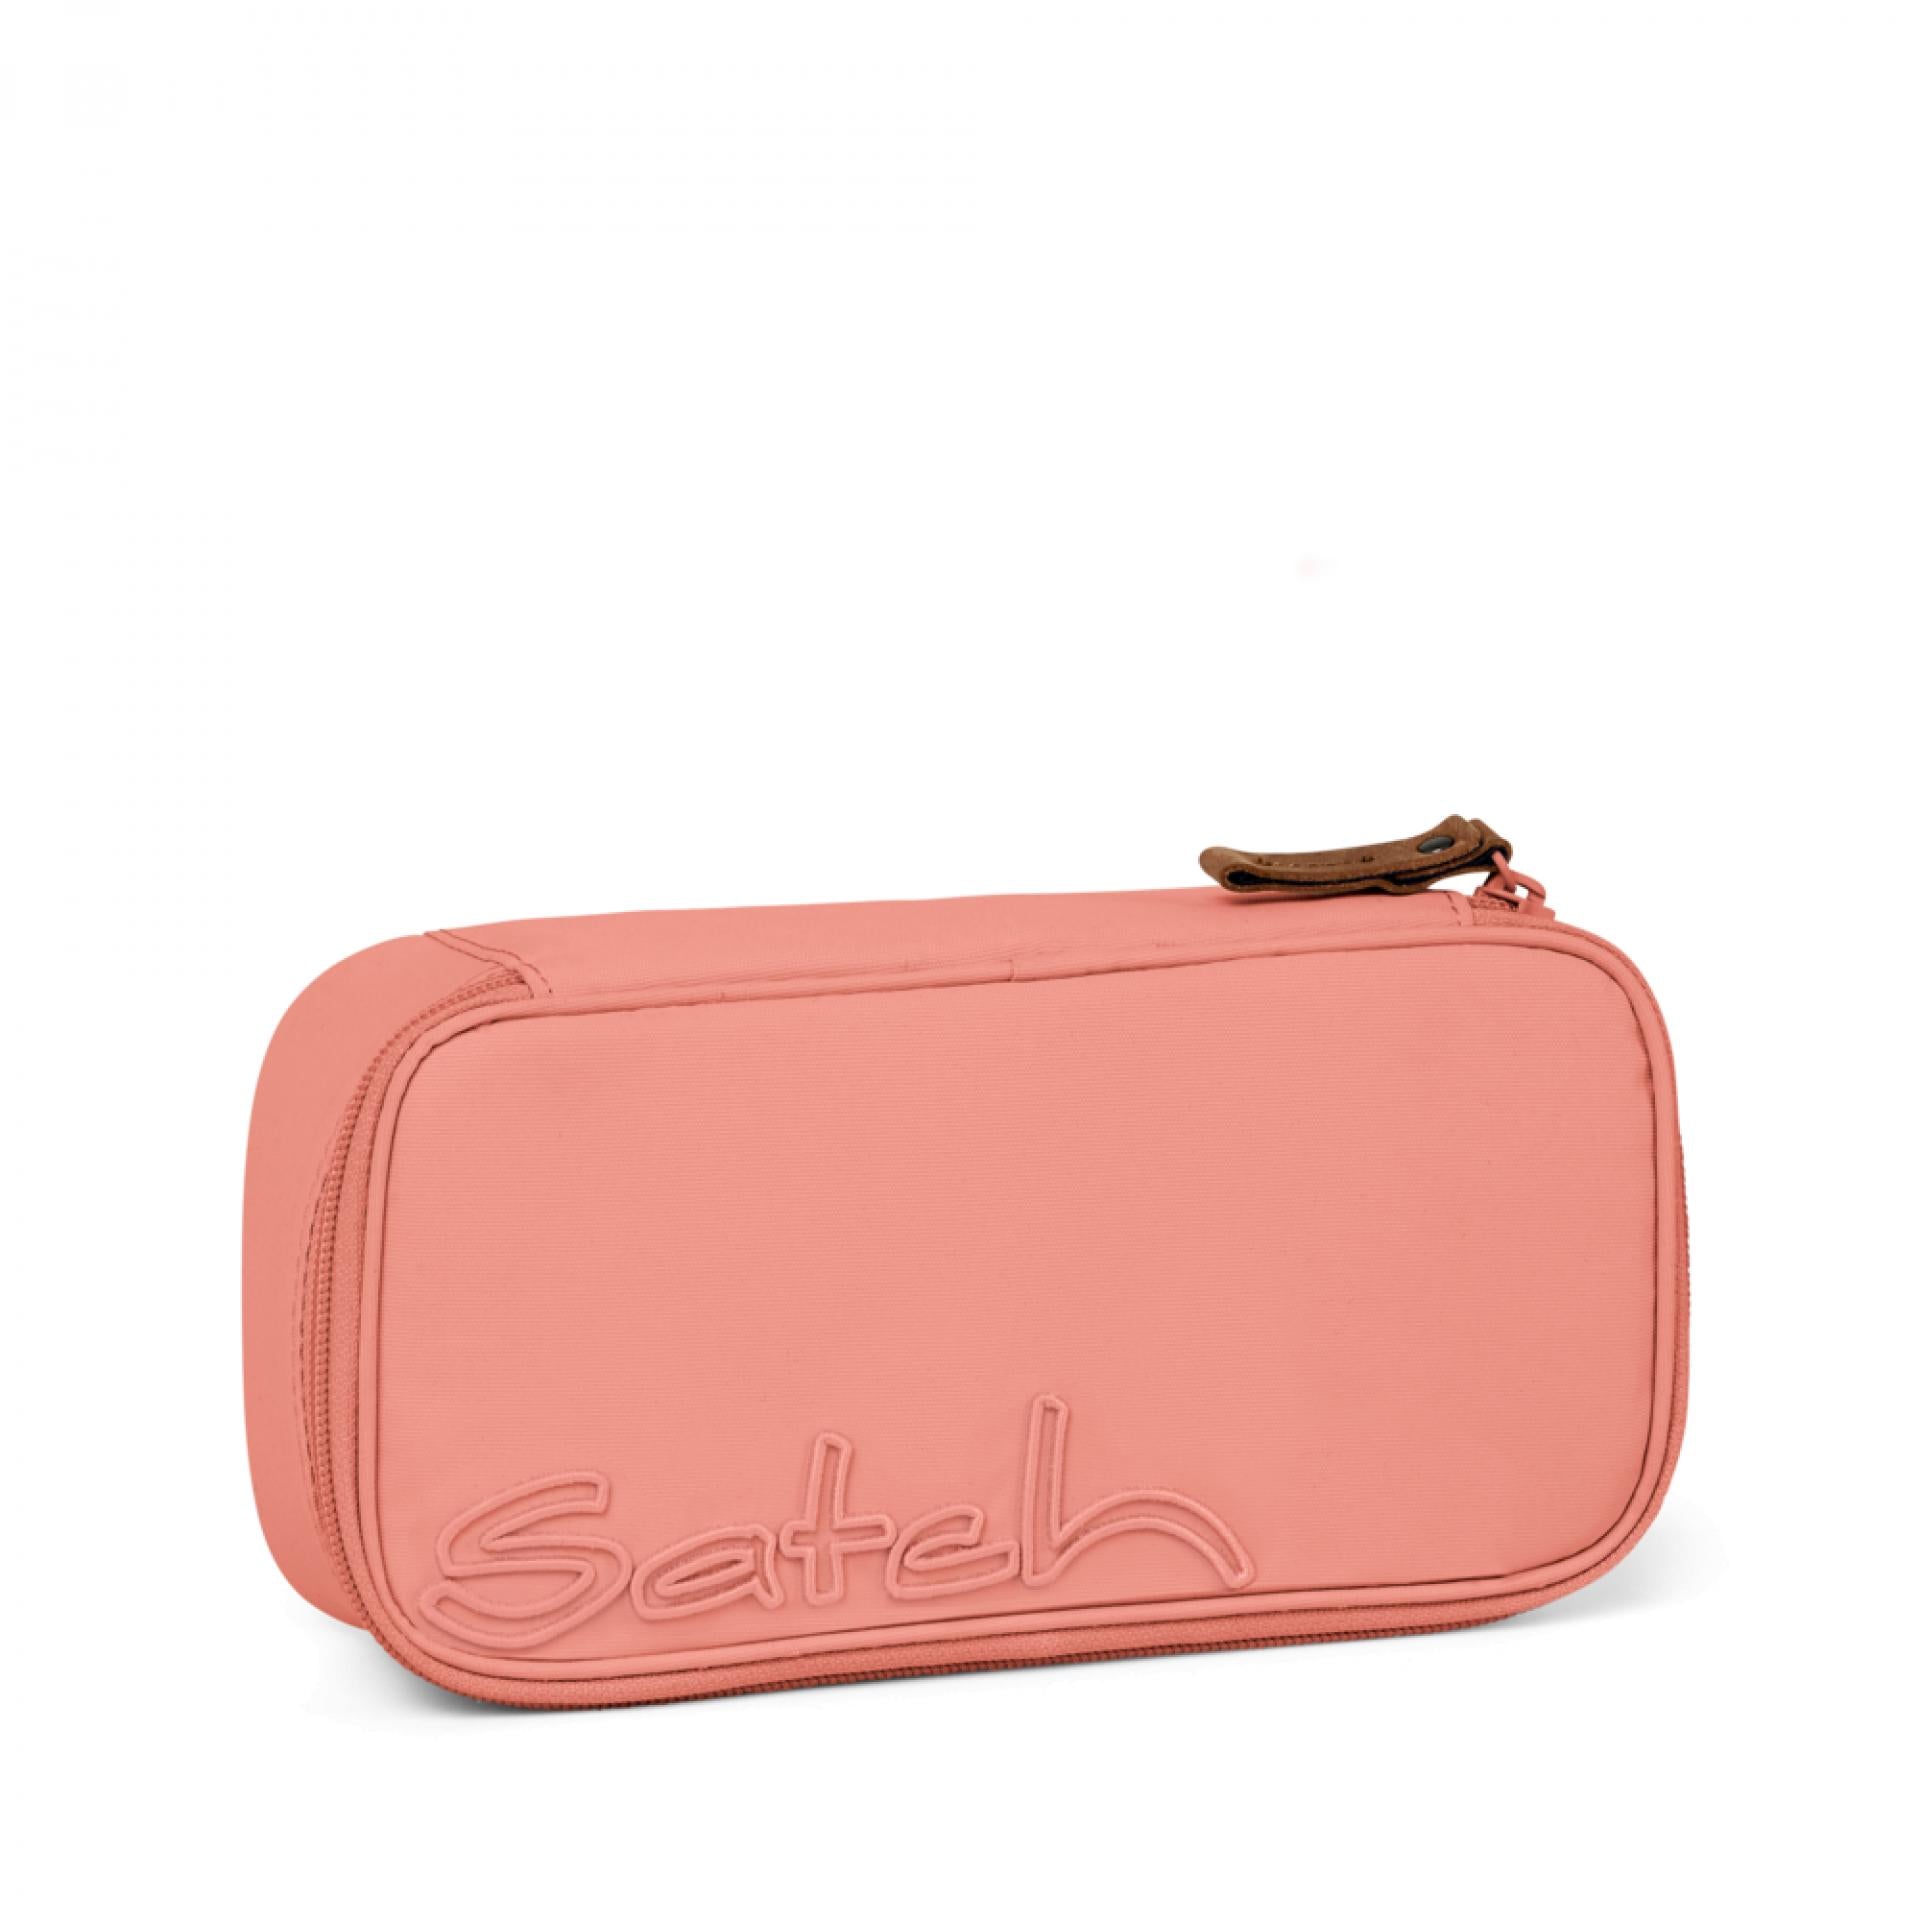 Satch Schlamperbox Stifteetui - Farbe: Nordic Coral